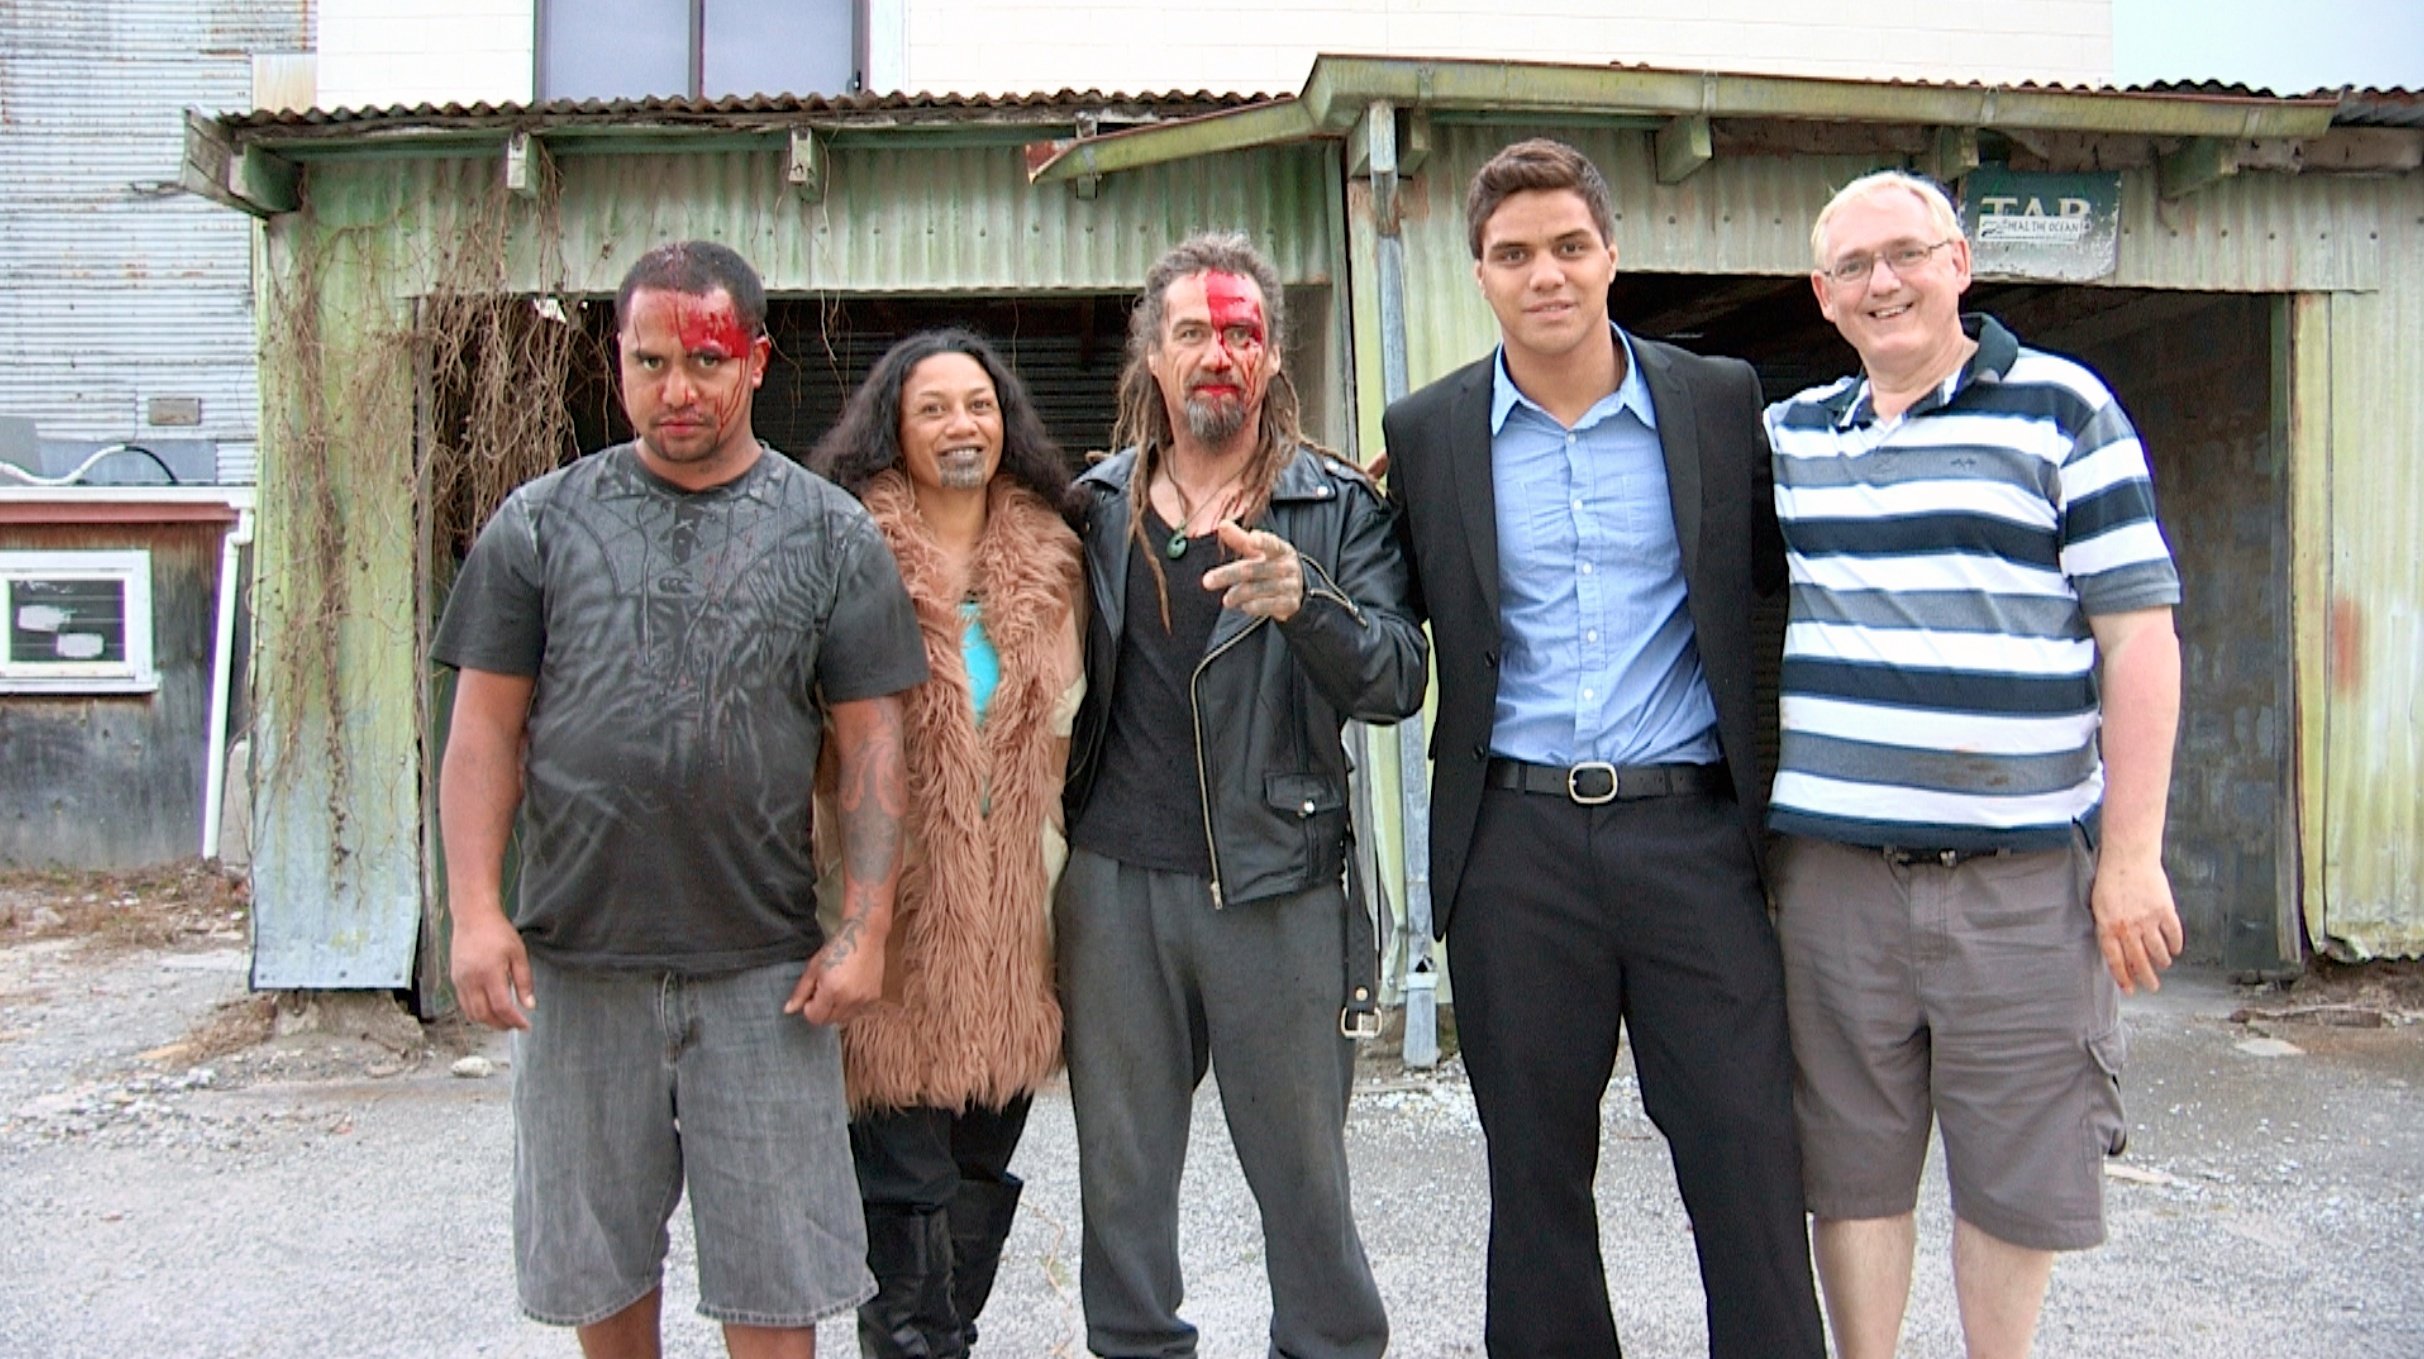 On set: David Whittet (Director) with John Stainton (Koriata), Lisa Beach (Alice) and gangster extras.